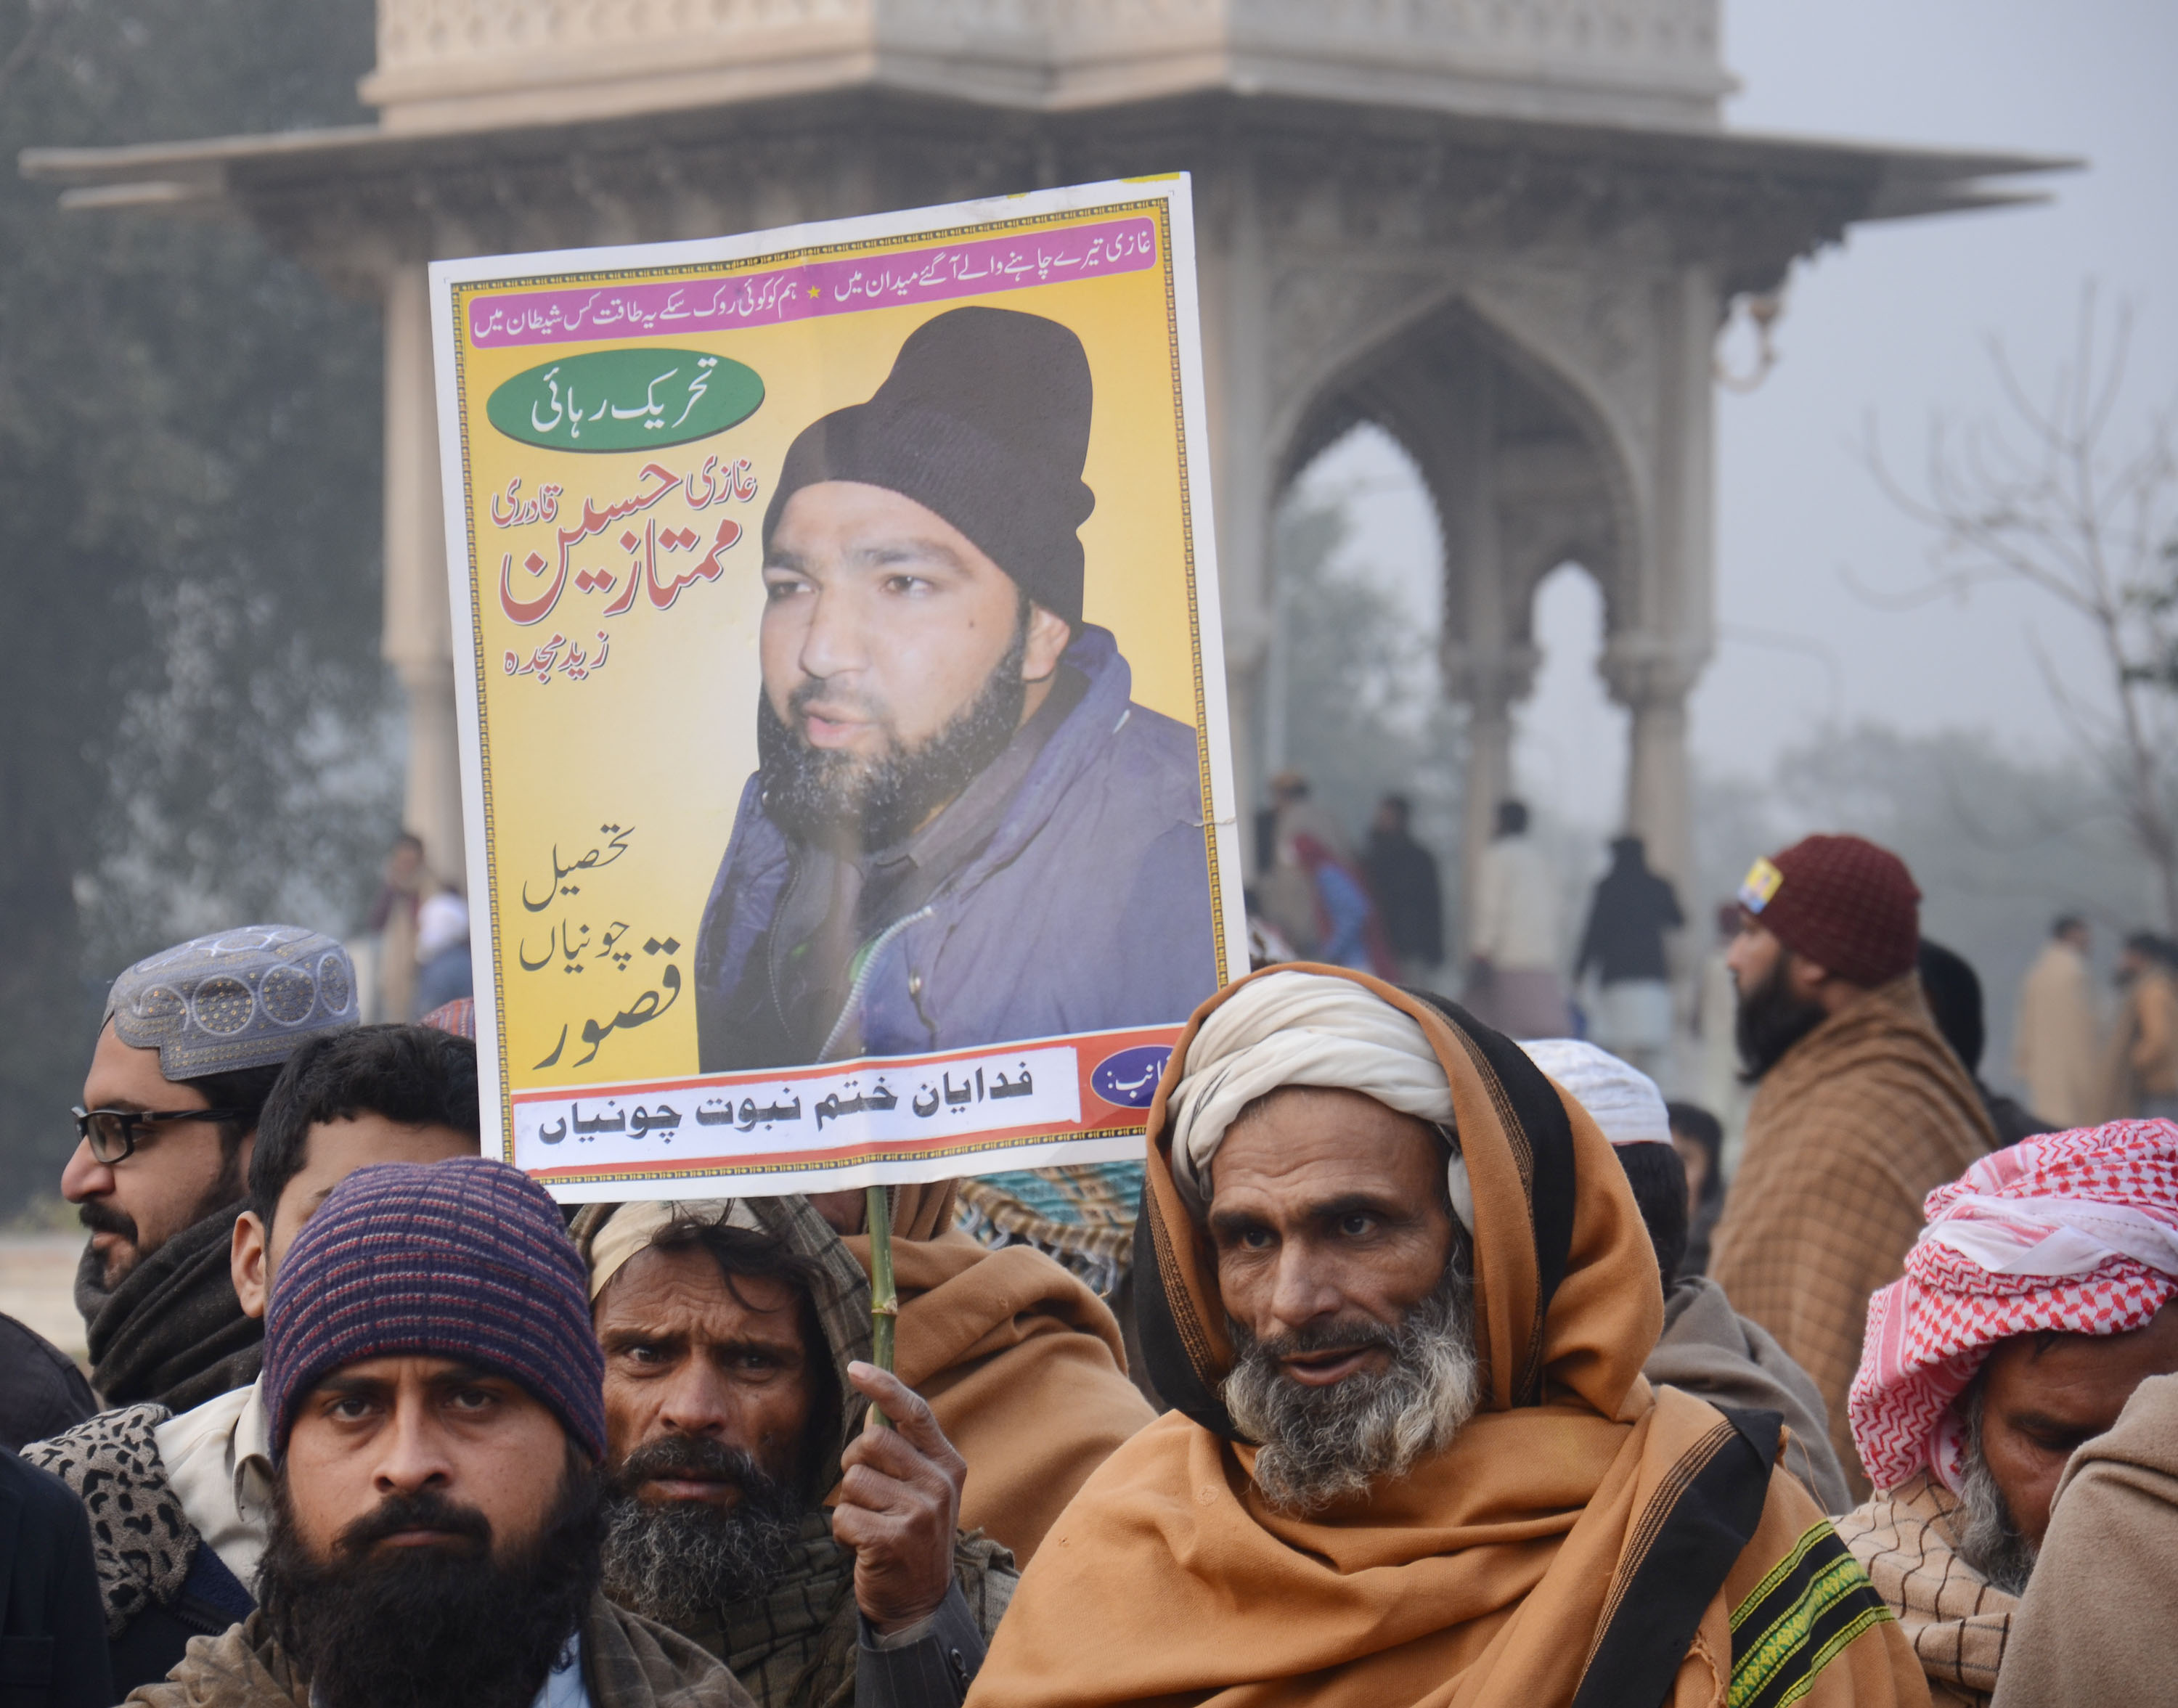 Activists from Pakistani religious groups chant slogans against the execution of Mumtaz Qadri during a rally in Lahore on Jan. 25, 2016 (Rana Sajid Hussain—Pacific Press/LightRocket/Getty Images)